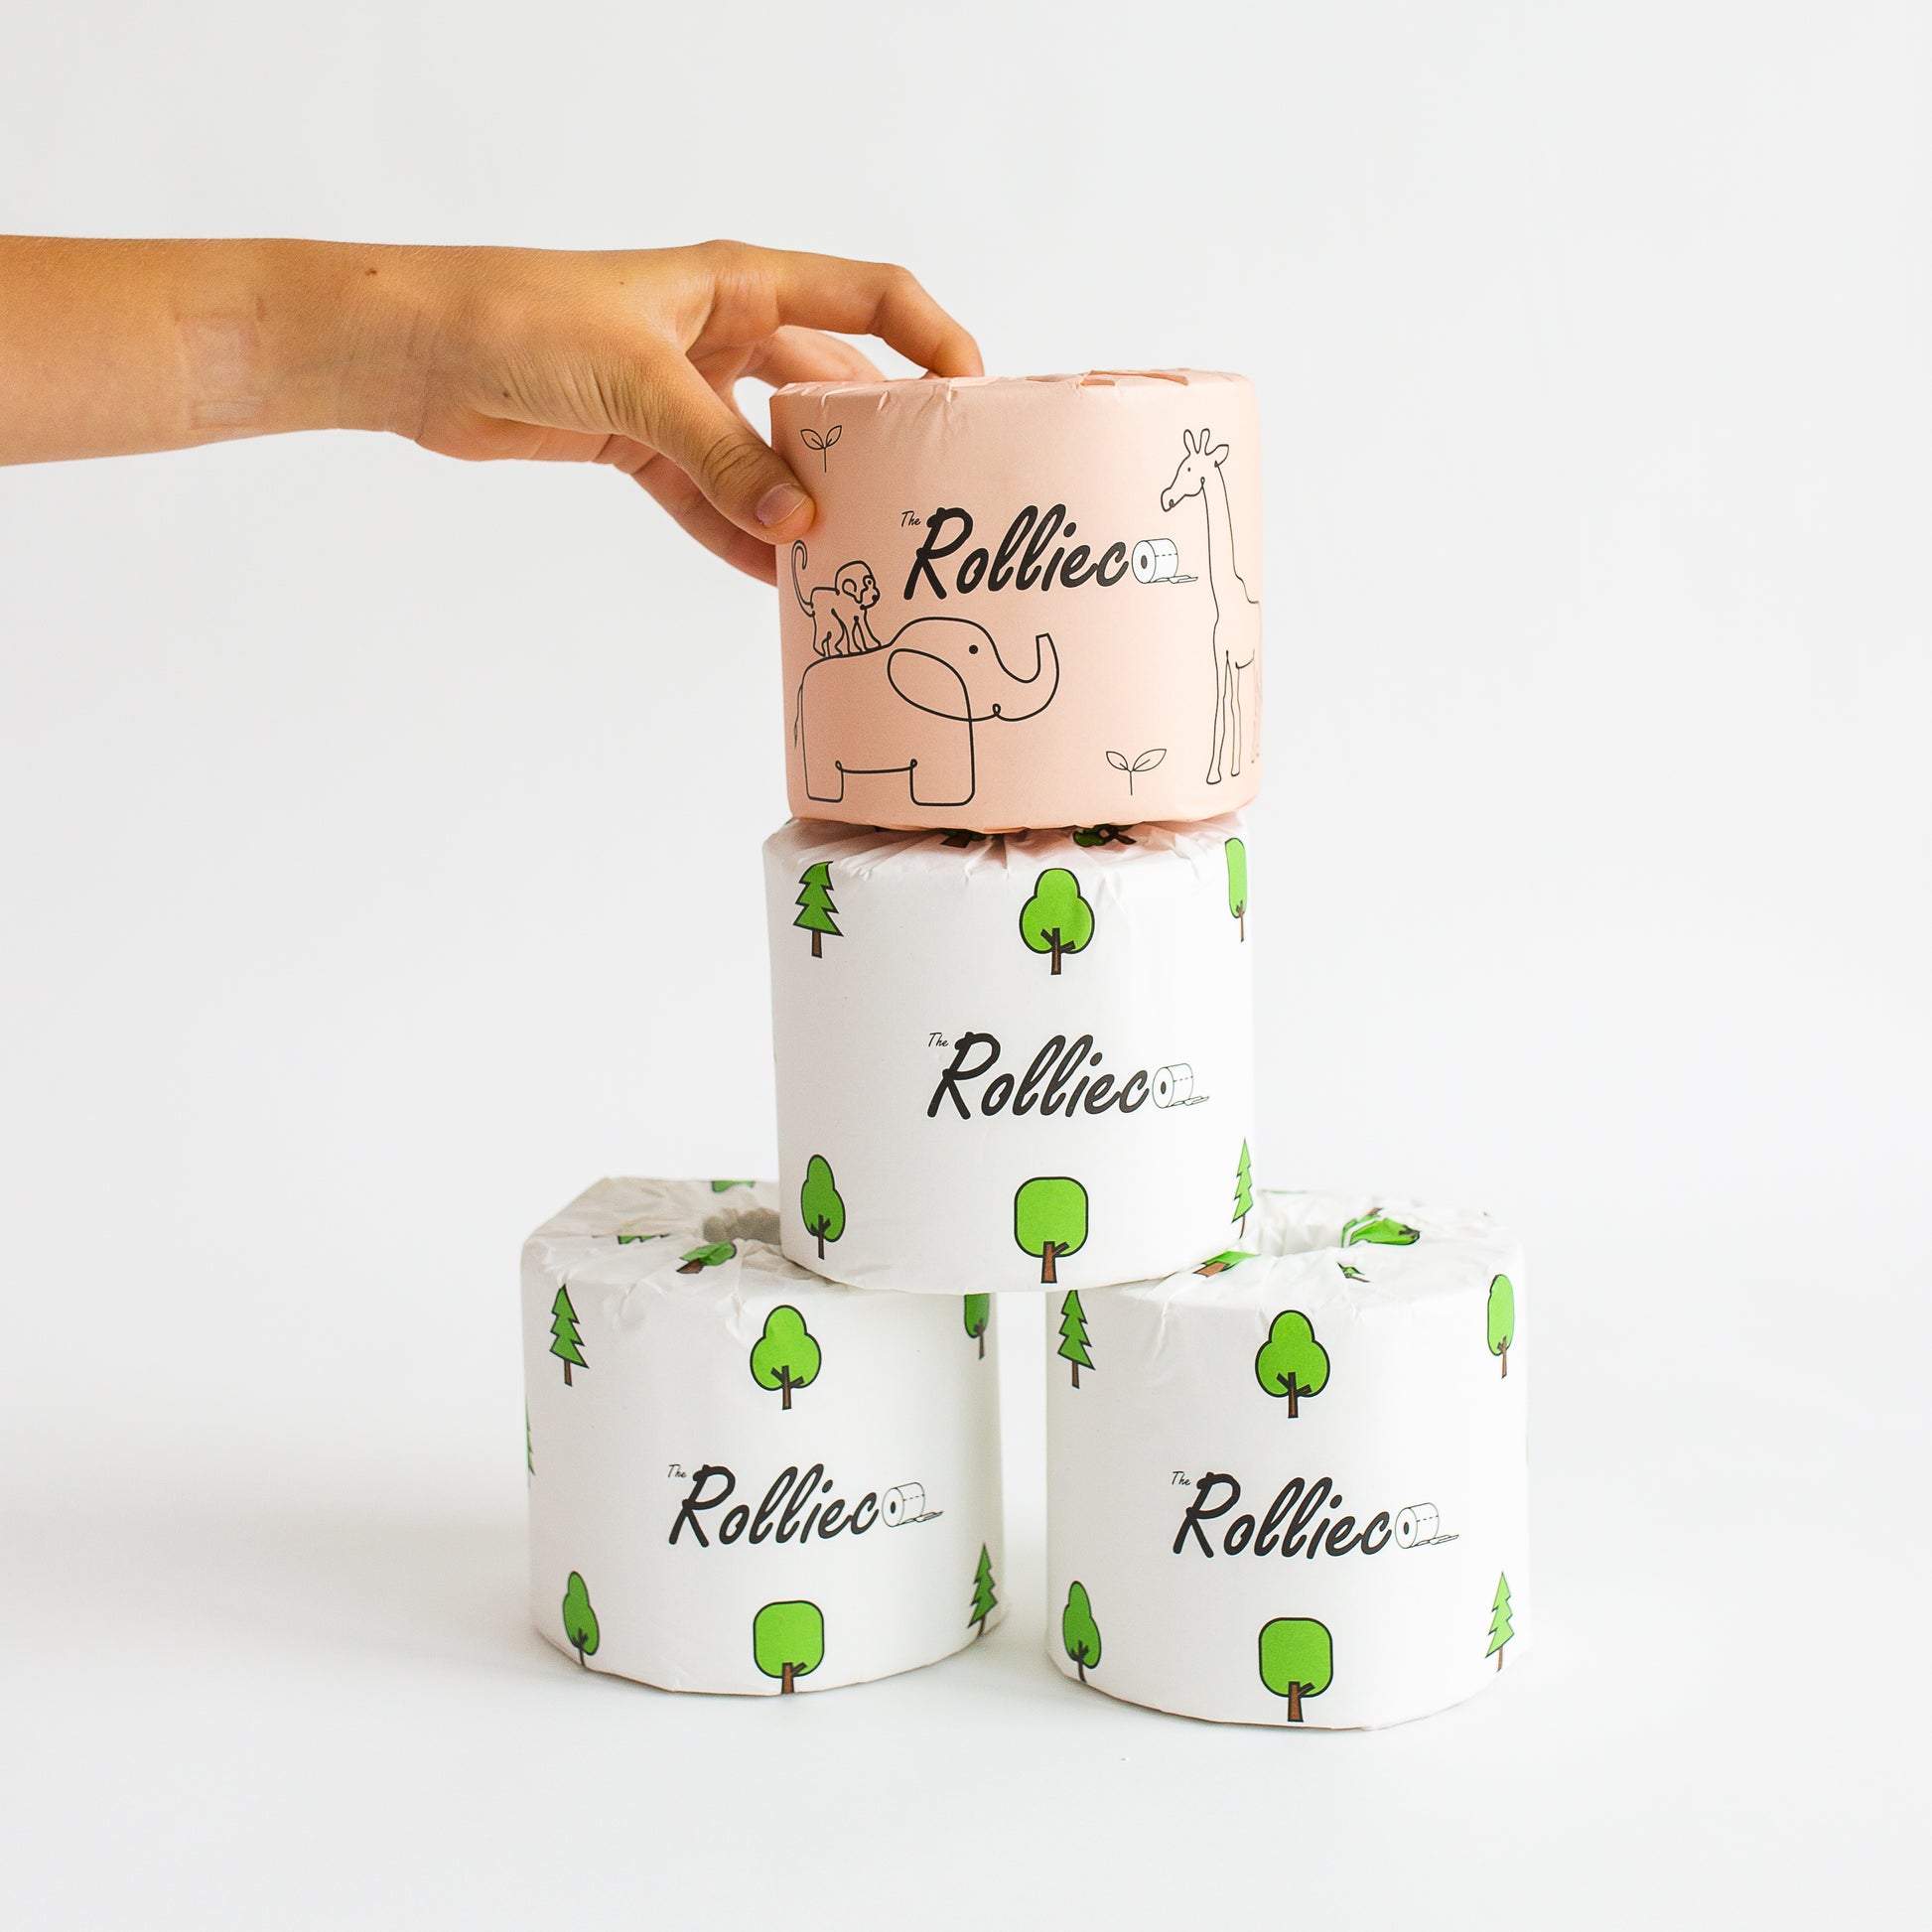 4 rolls of eco toilet papers stacked in a pyramid manner with a hand picking the top one